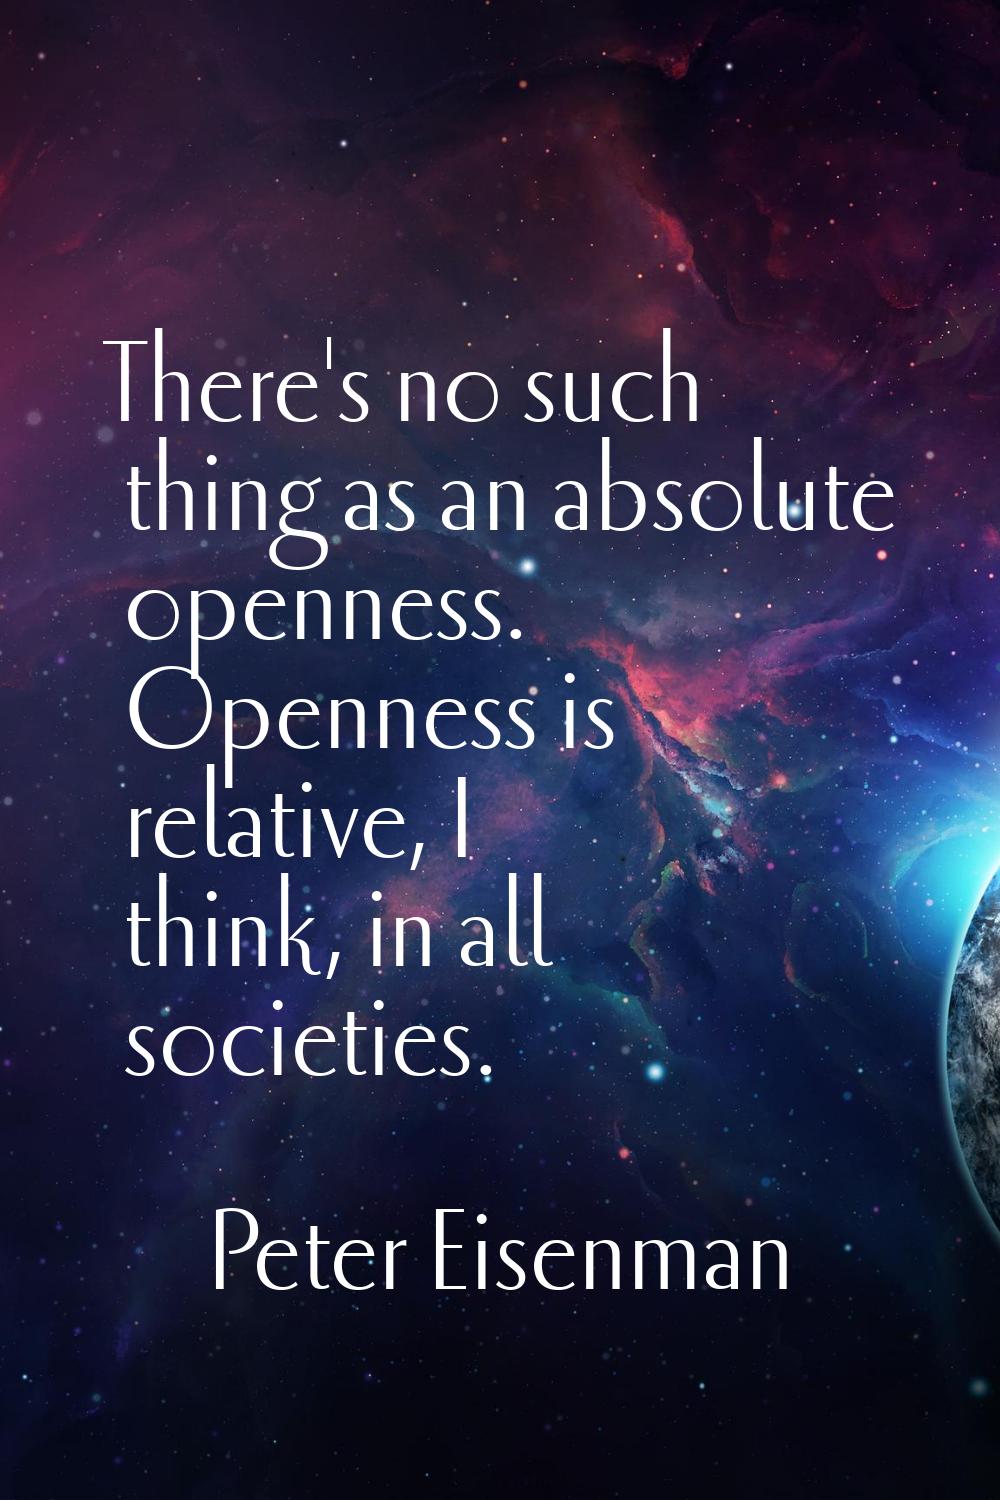 There's no such thing as an absolute openness. Openness is relative, I think, in all societies.